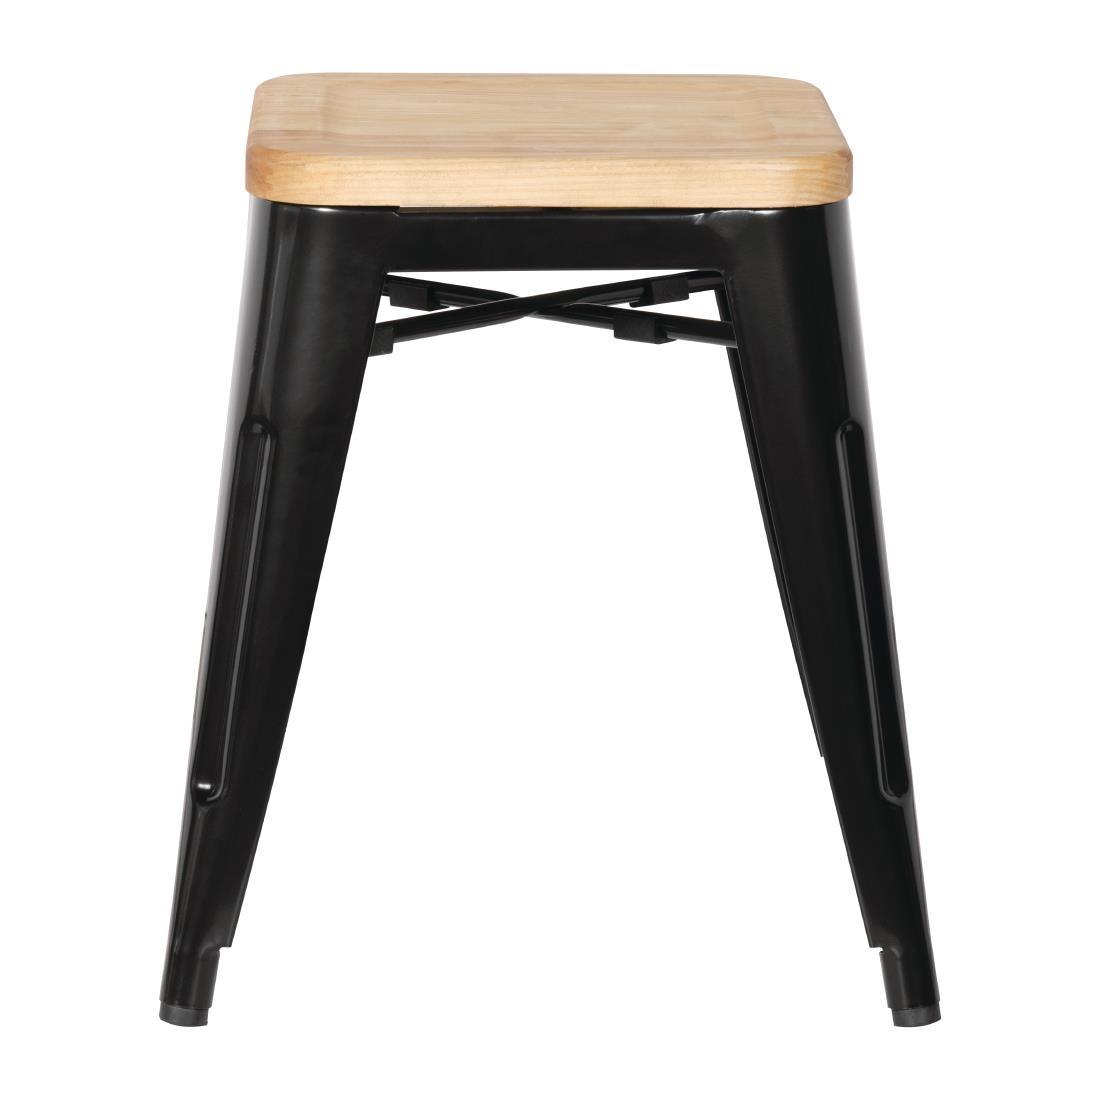 Bolero Bistro Low Stools with Wooden Seat Pad Black (Pack of 4) - GM635  - 2